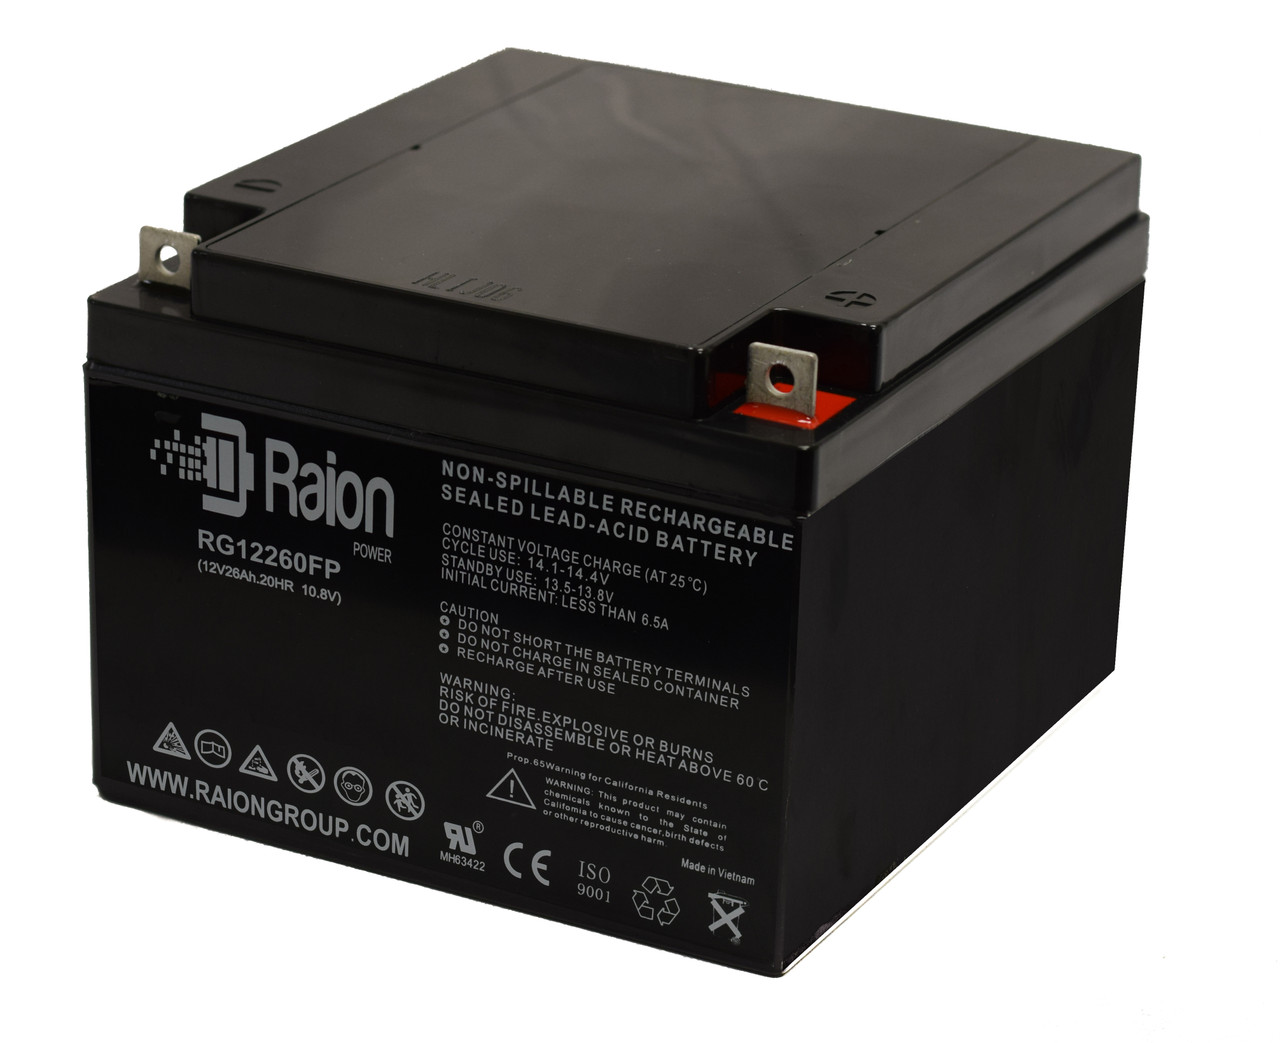 Raion Power Replacement 12V 26Ah Battery for R&D 5393 - 1 Pack